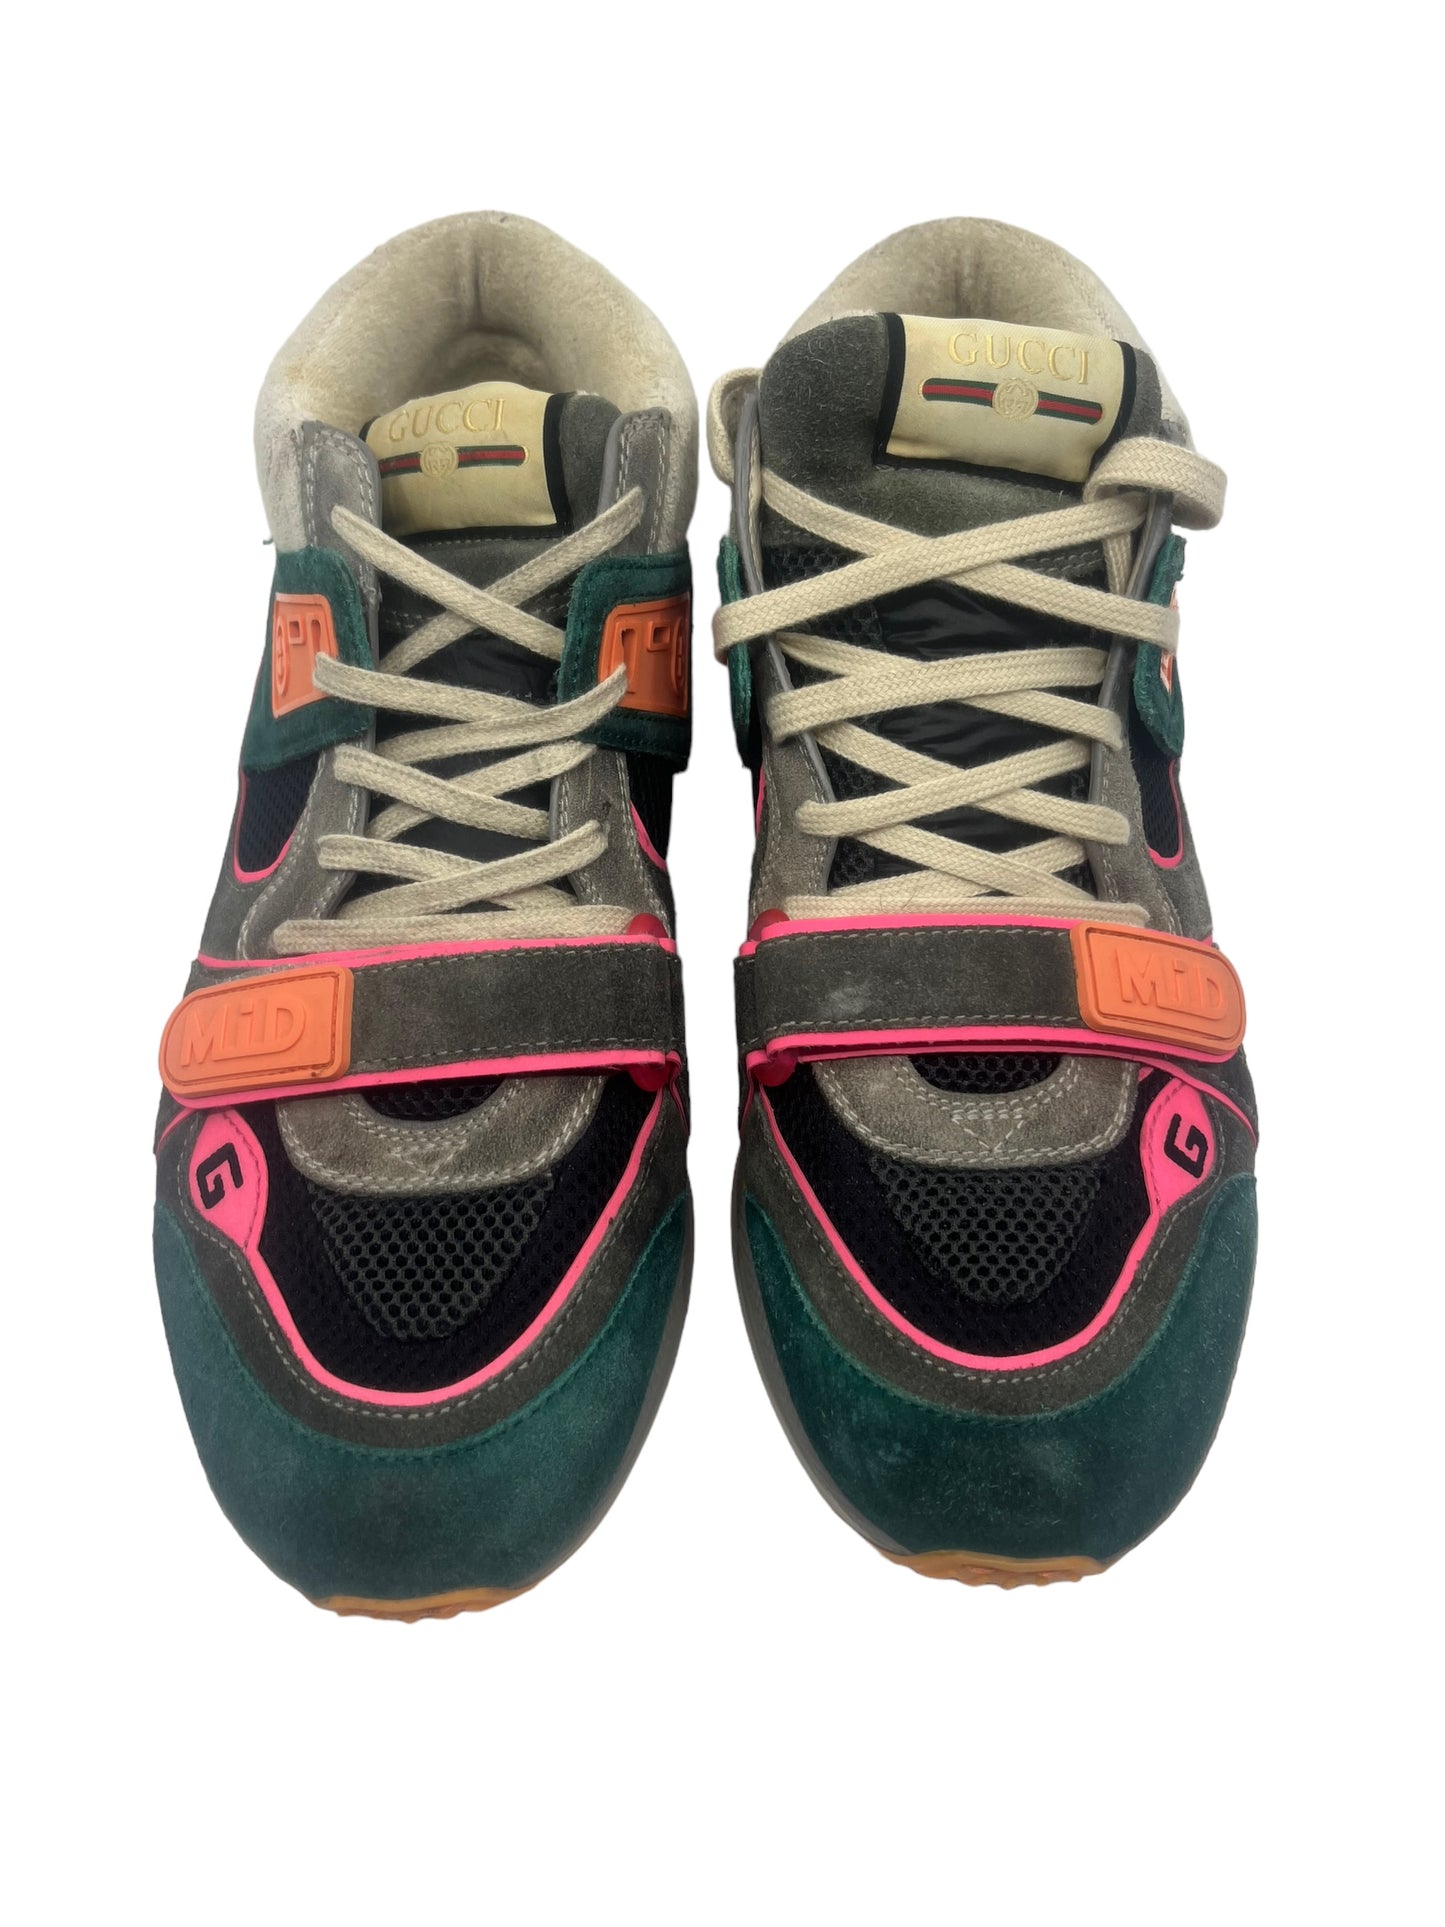 Gucci Ultrapace Mid Green Teal Size 10 pre-Owned